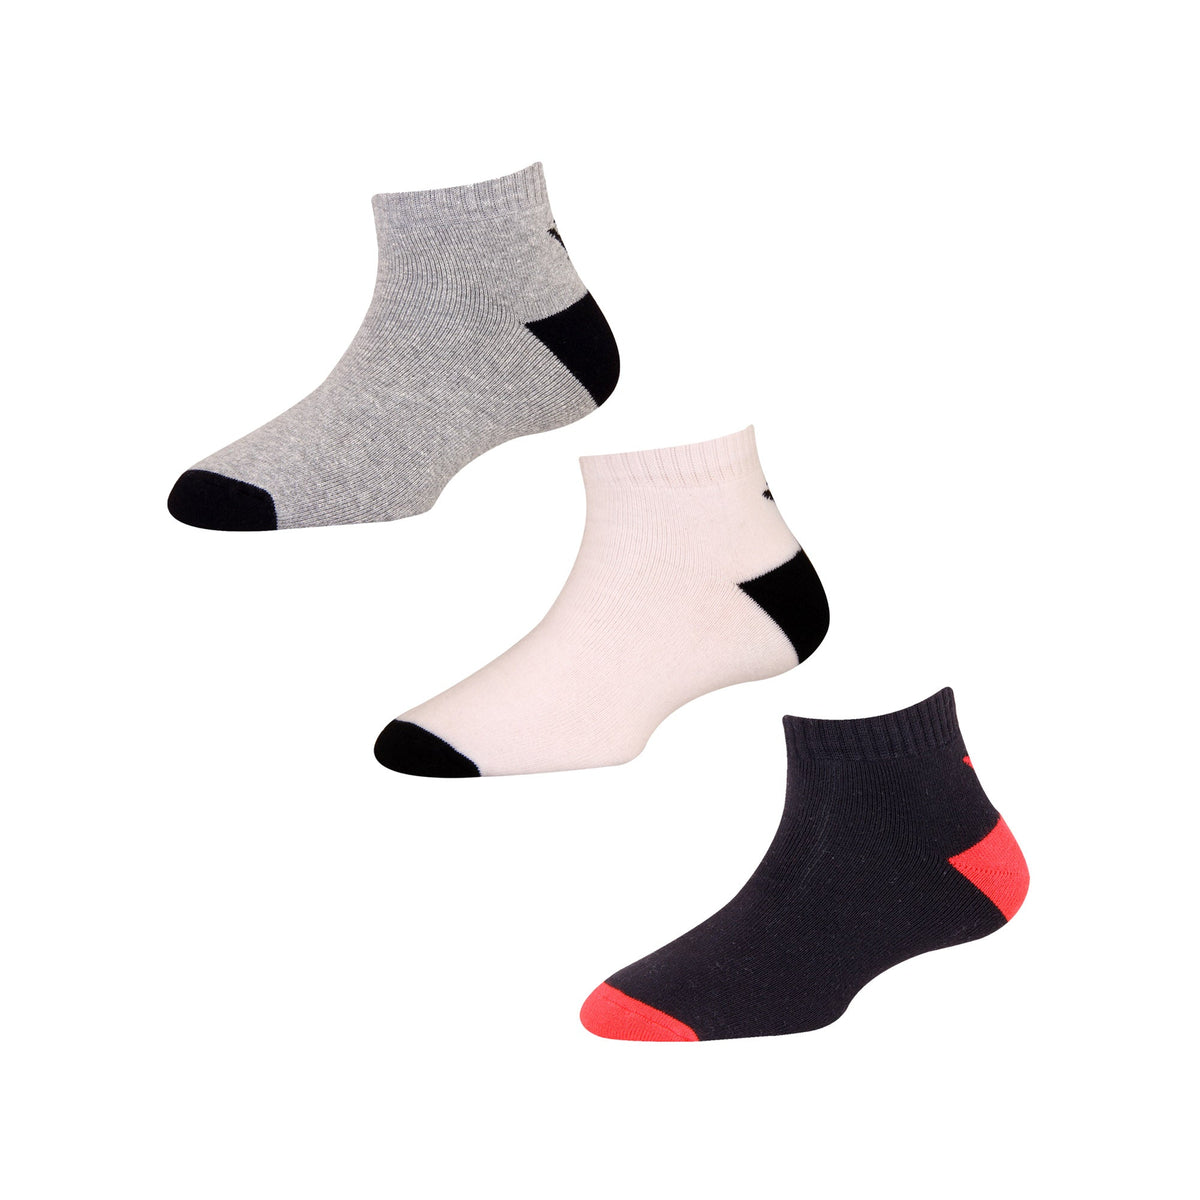 Men's Solid TS03 Pack of 3 Cotton Terry Sports Ankle Socks